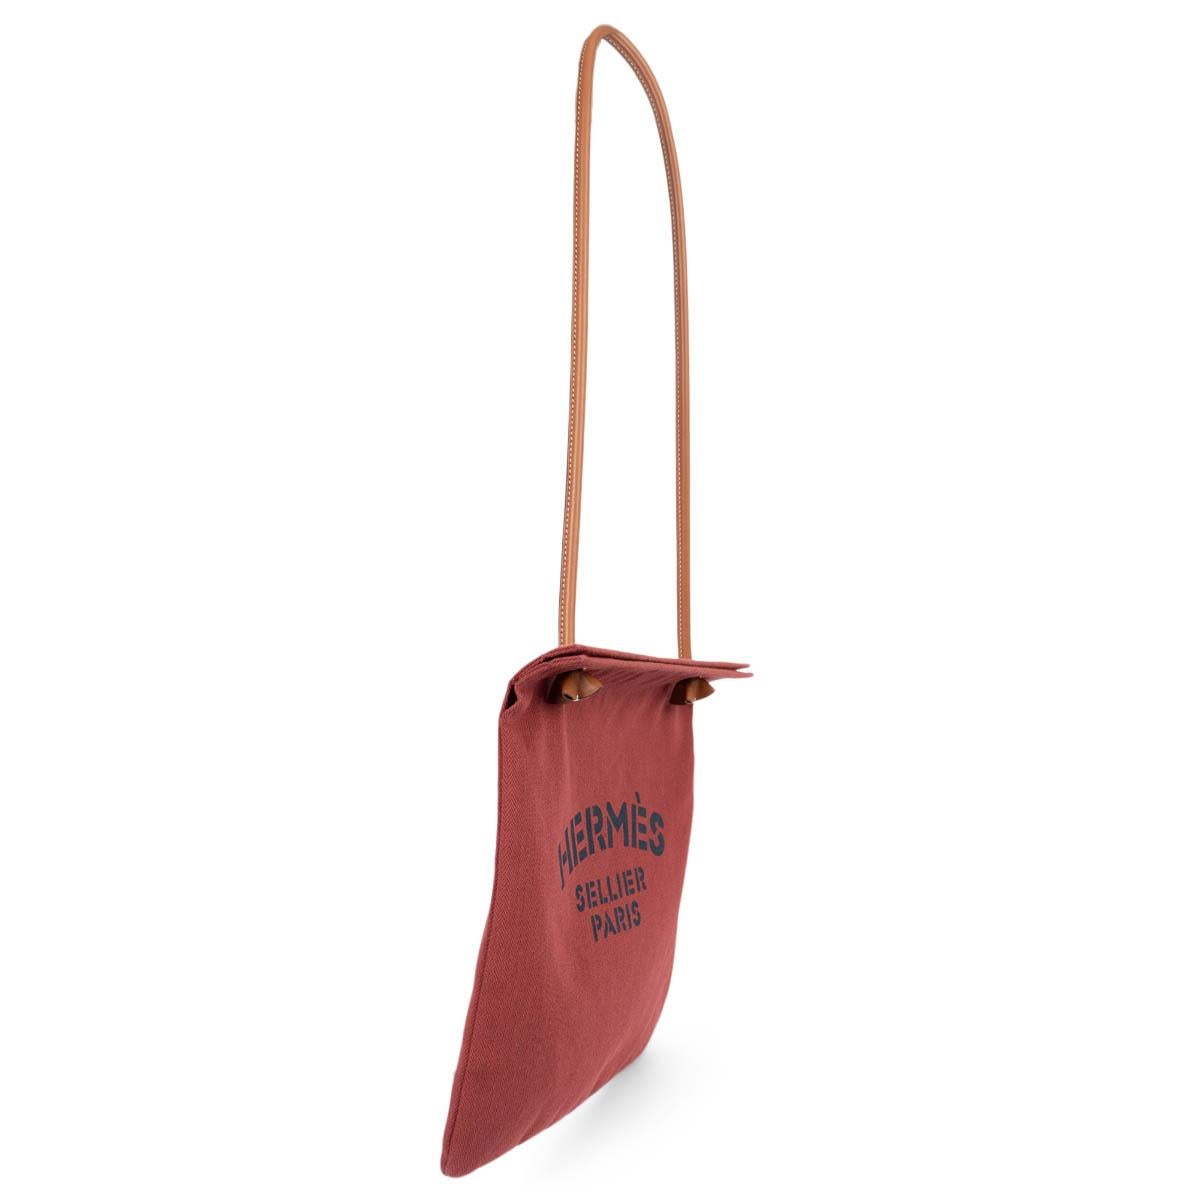 100% authentic Hermès Aline grooming bag in Rouge H (burgundy) herringbone canvas with 'Hermès Sellier Paris' print and Gold (camel) Veau Swift leather shoulder strap. Has been carried once and is in virtually new condition. Come with dust bag.